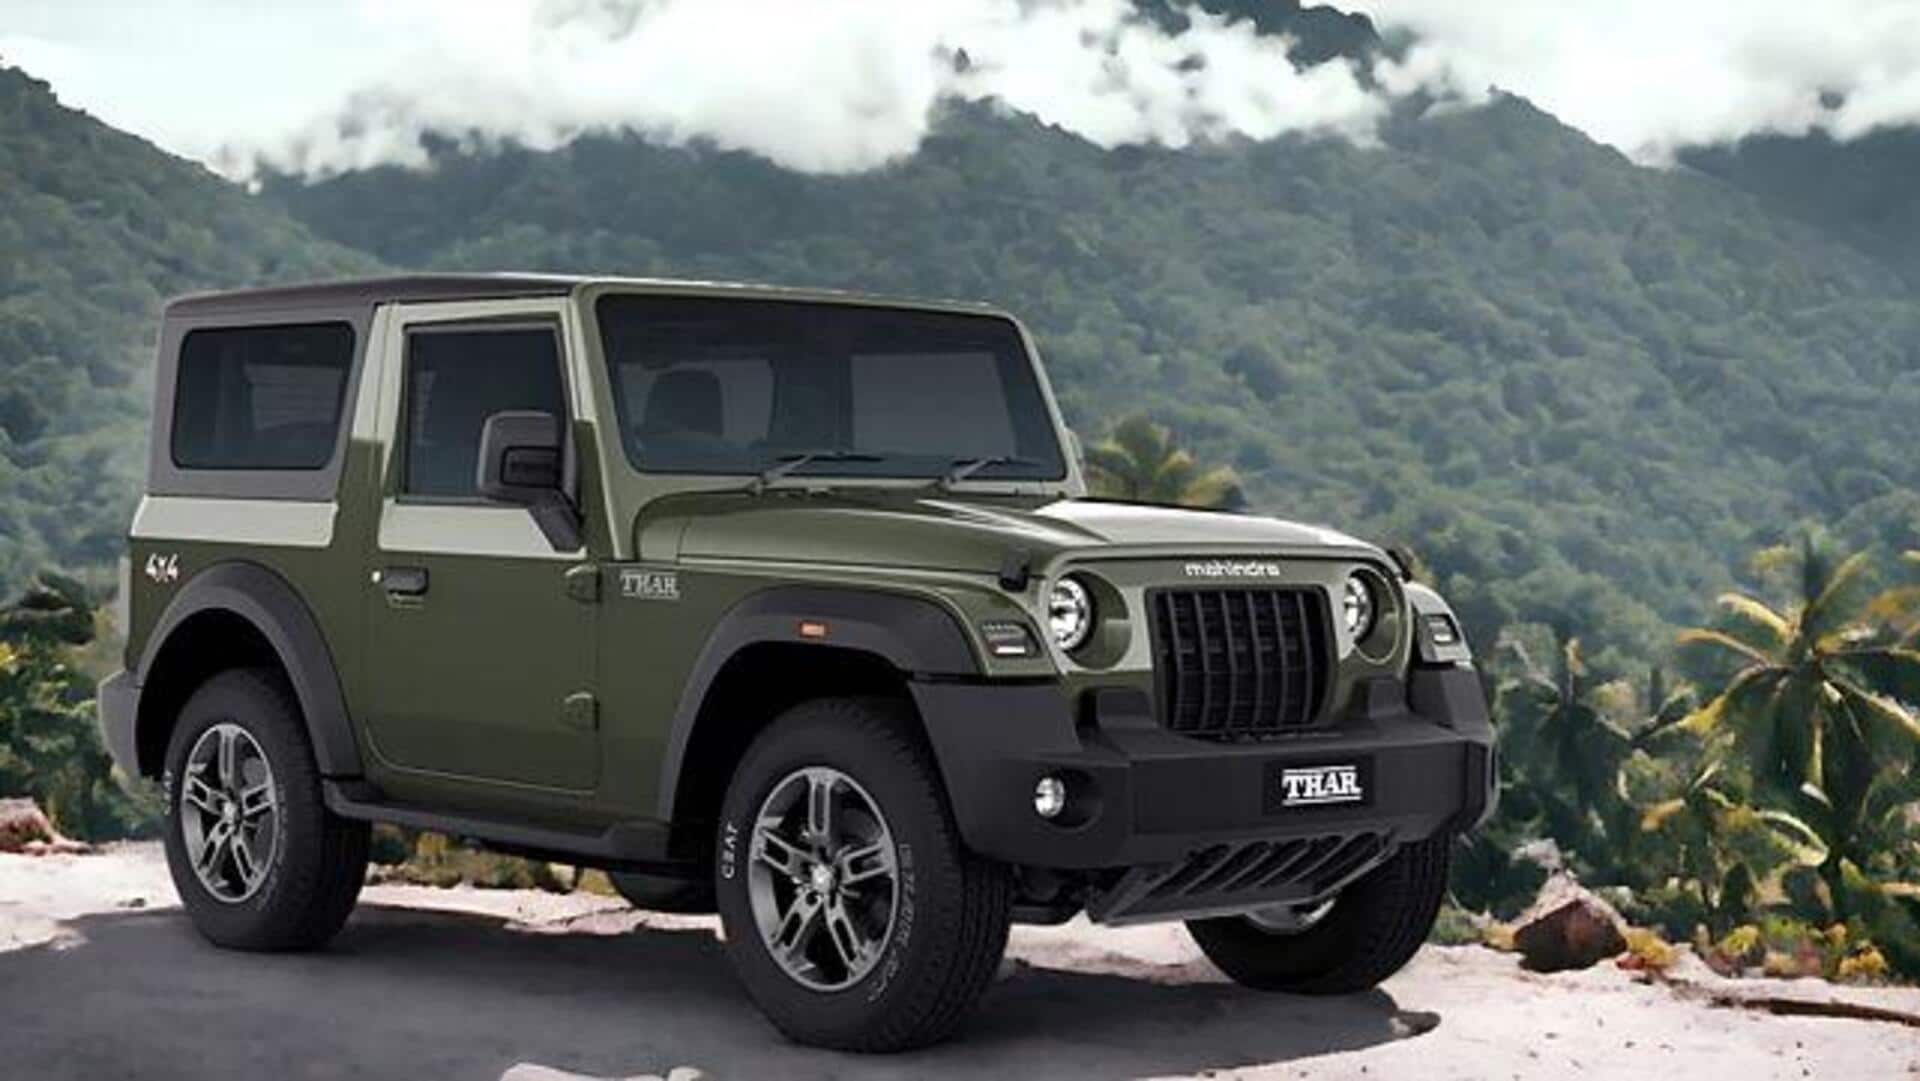 Mahindra Thar's Deep Forest color variant now available at dealerships